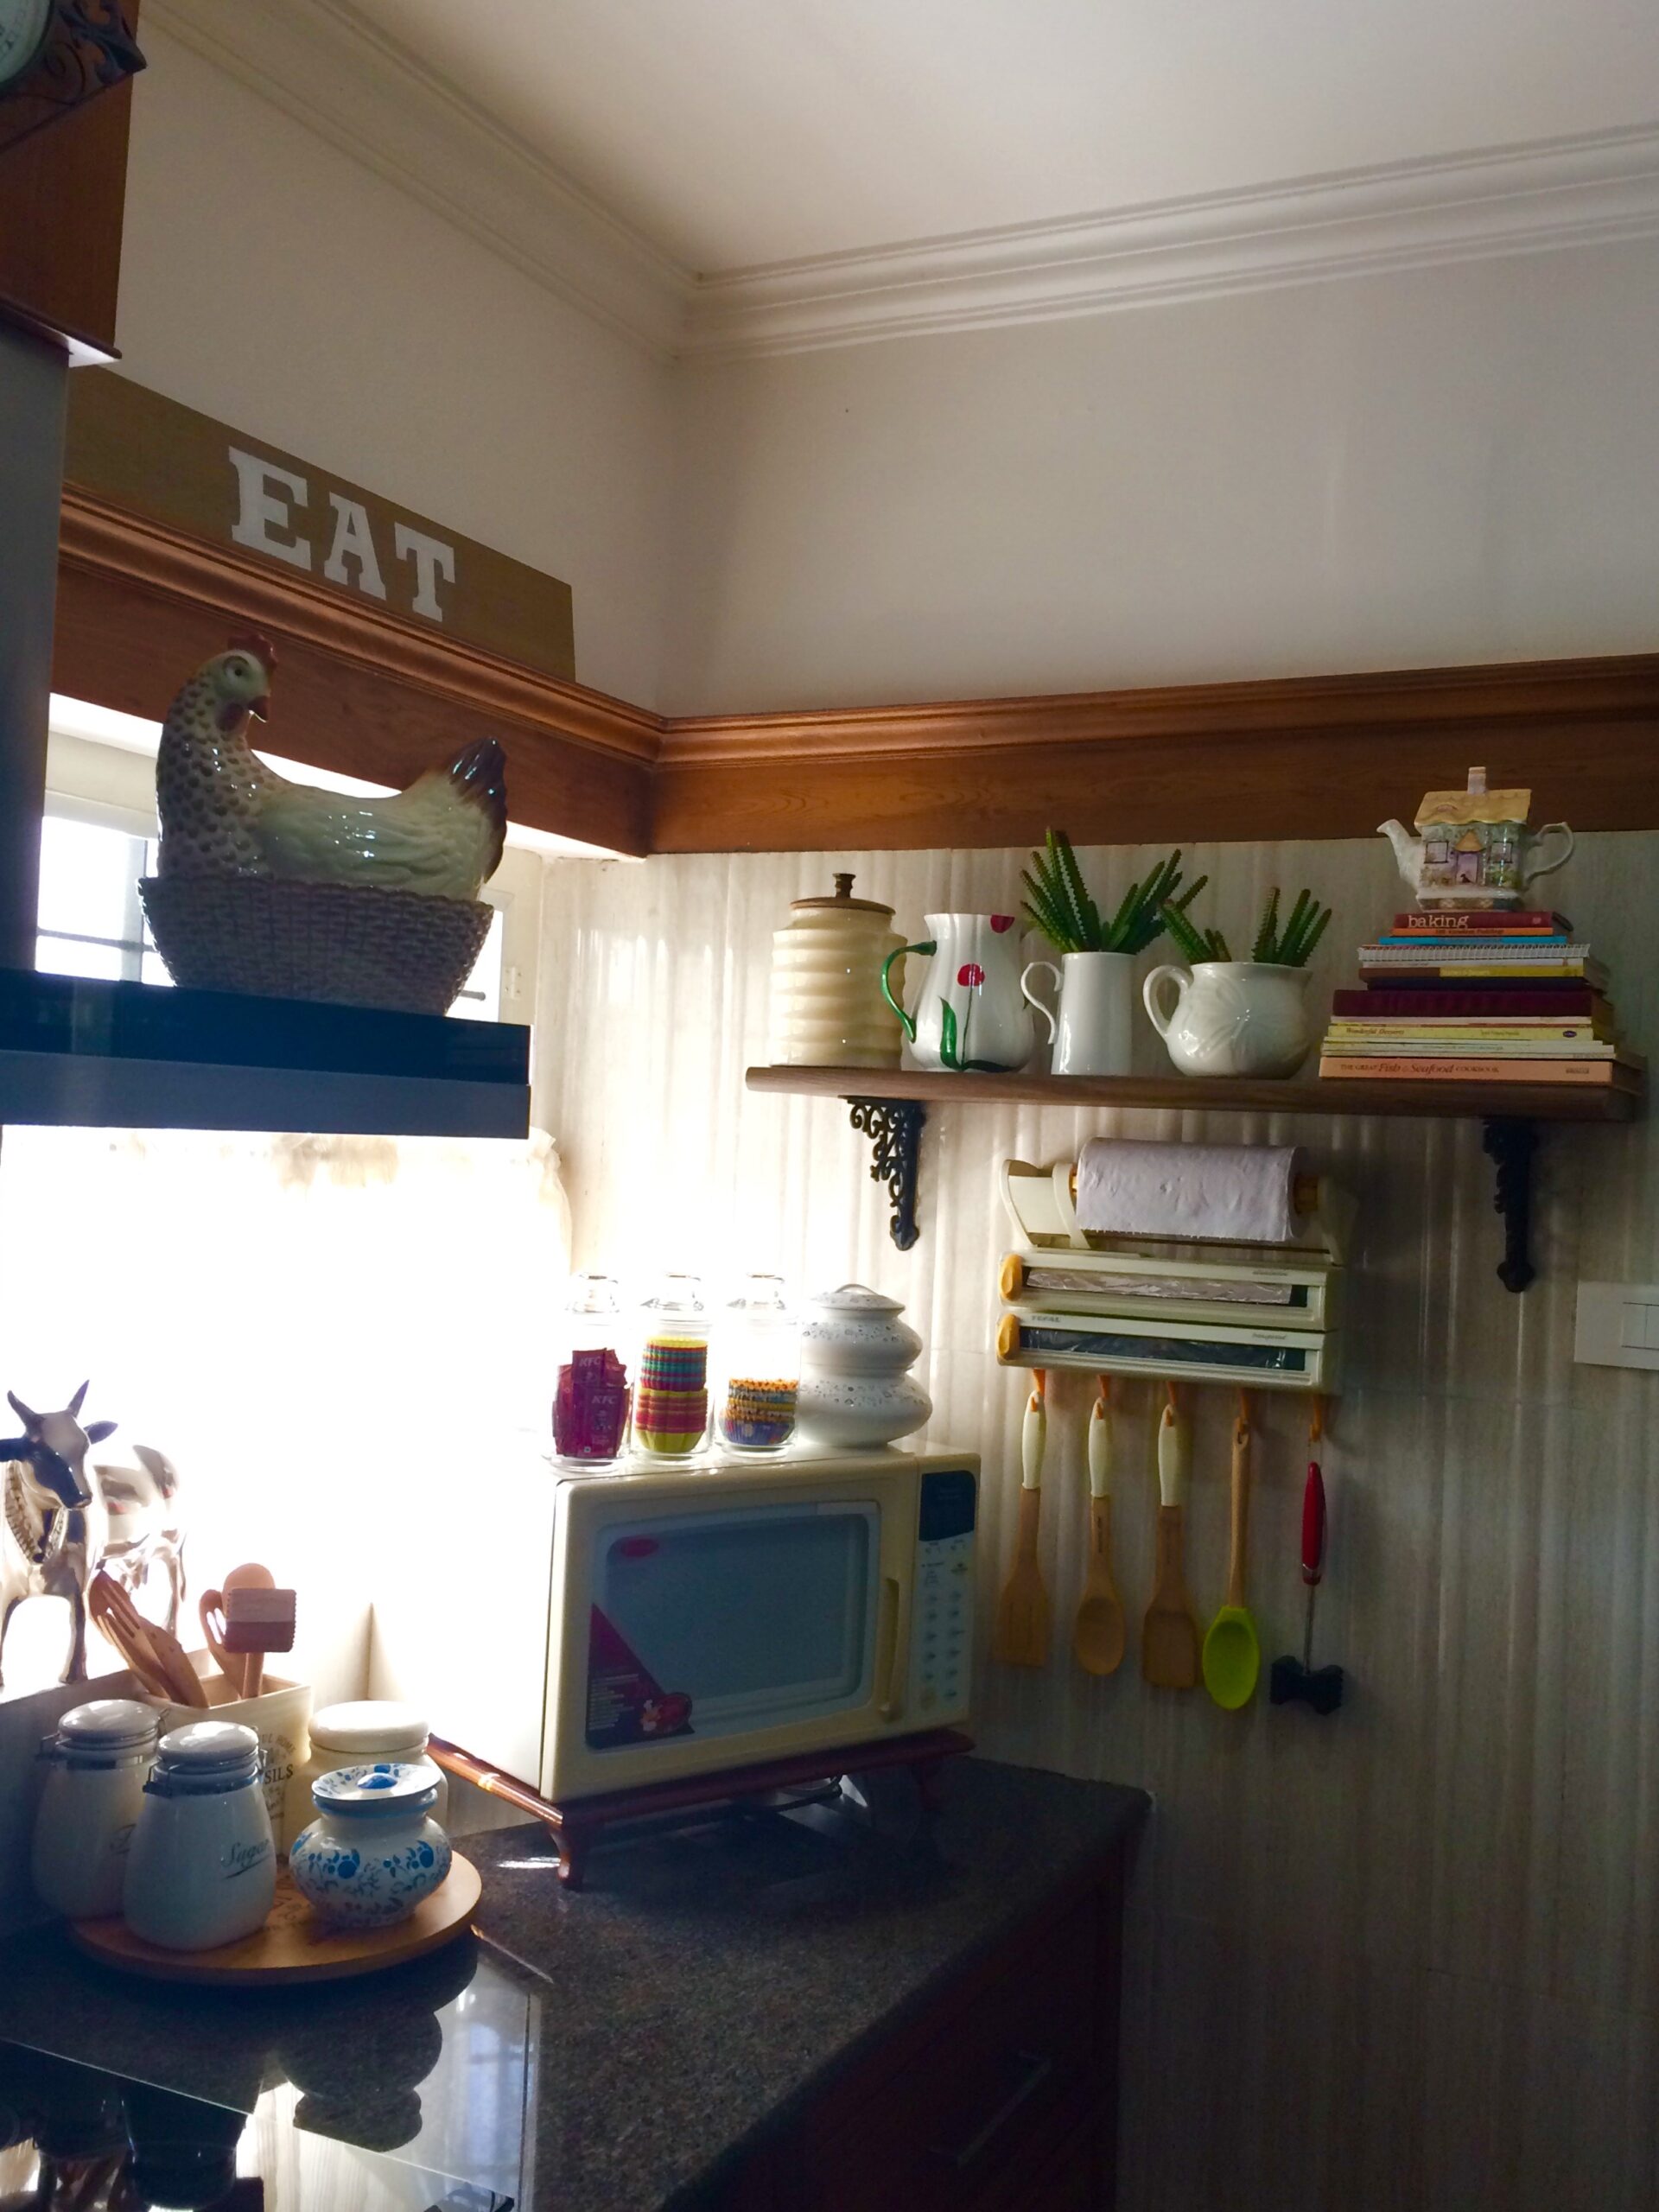 A lovely corner of the kitchen, in contrast to the seek cabinetry and glass shelves | Joseph home tour